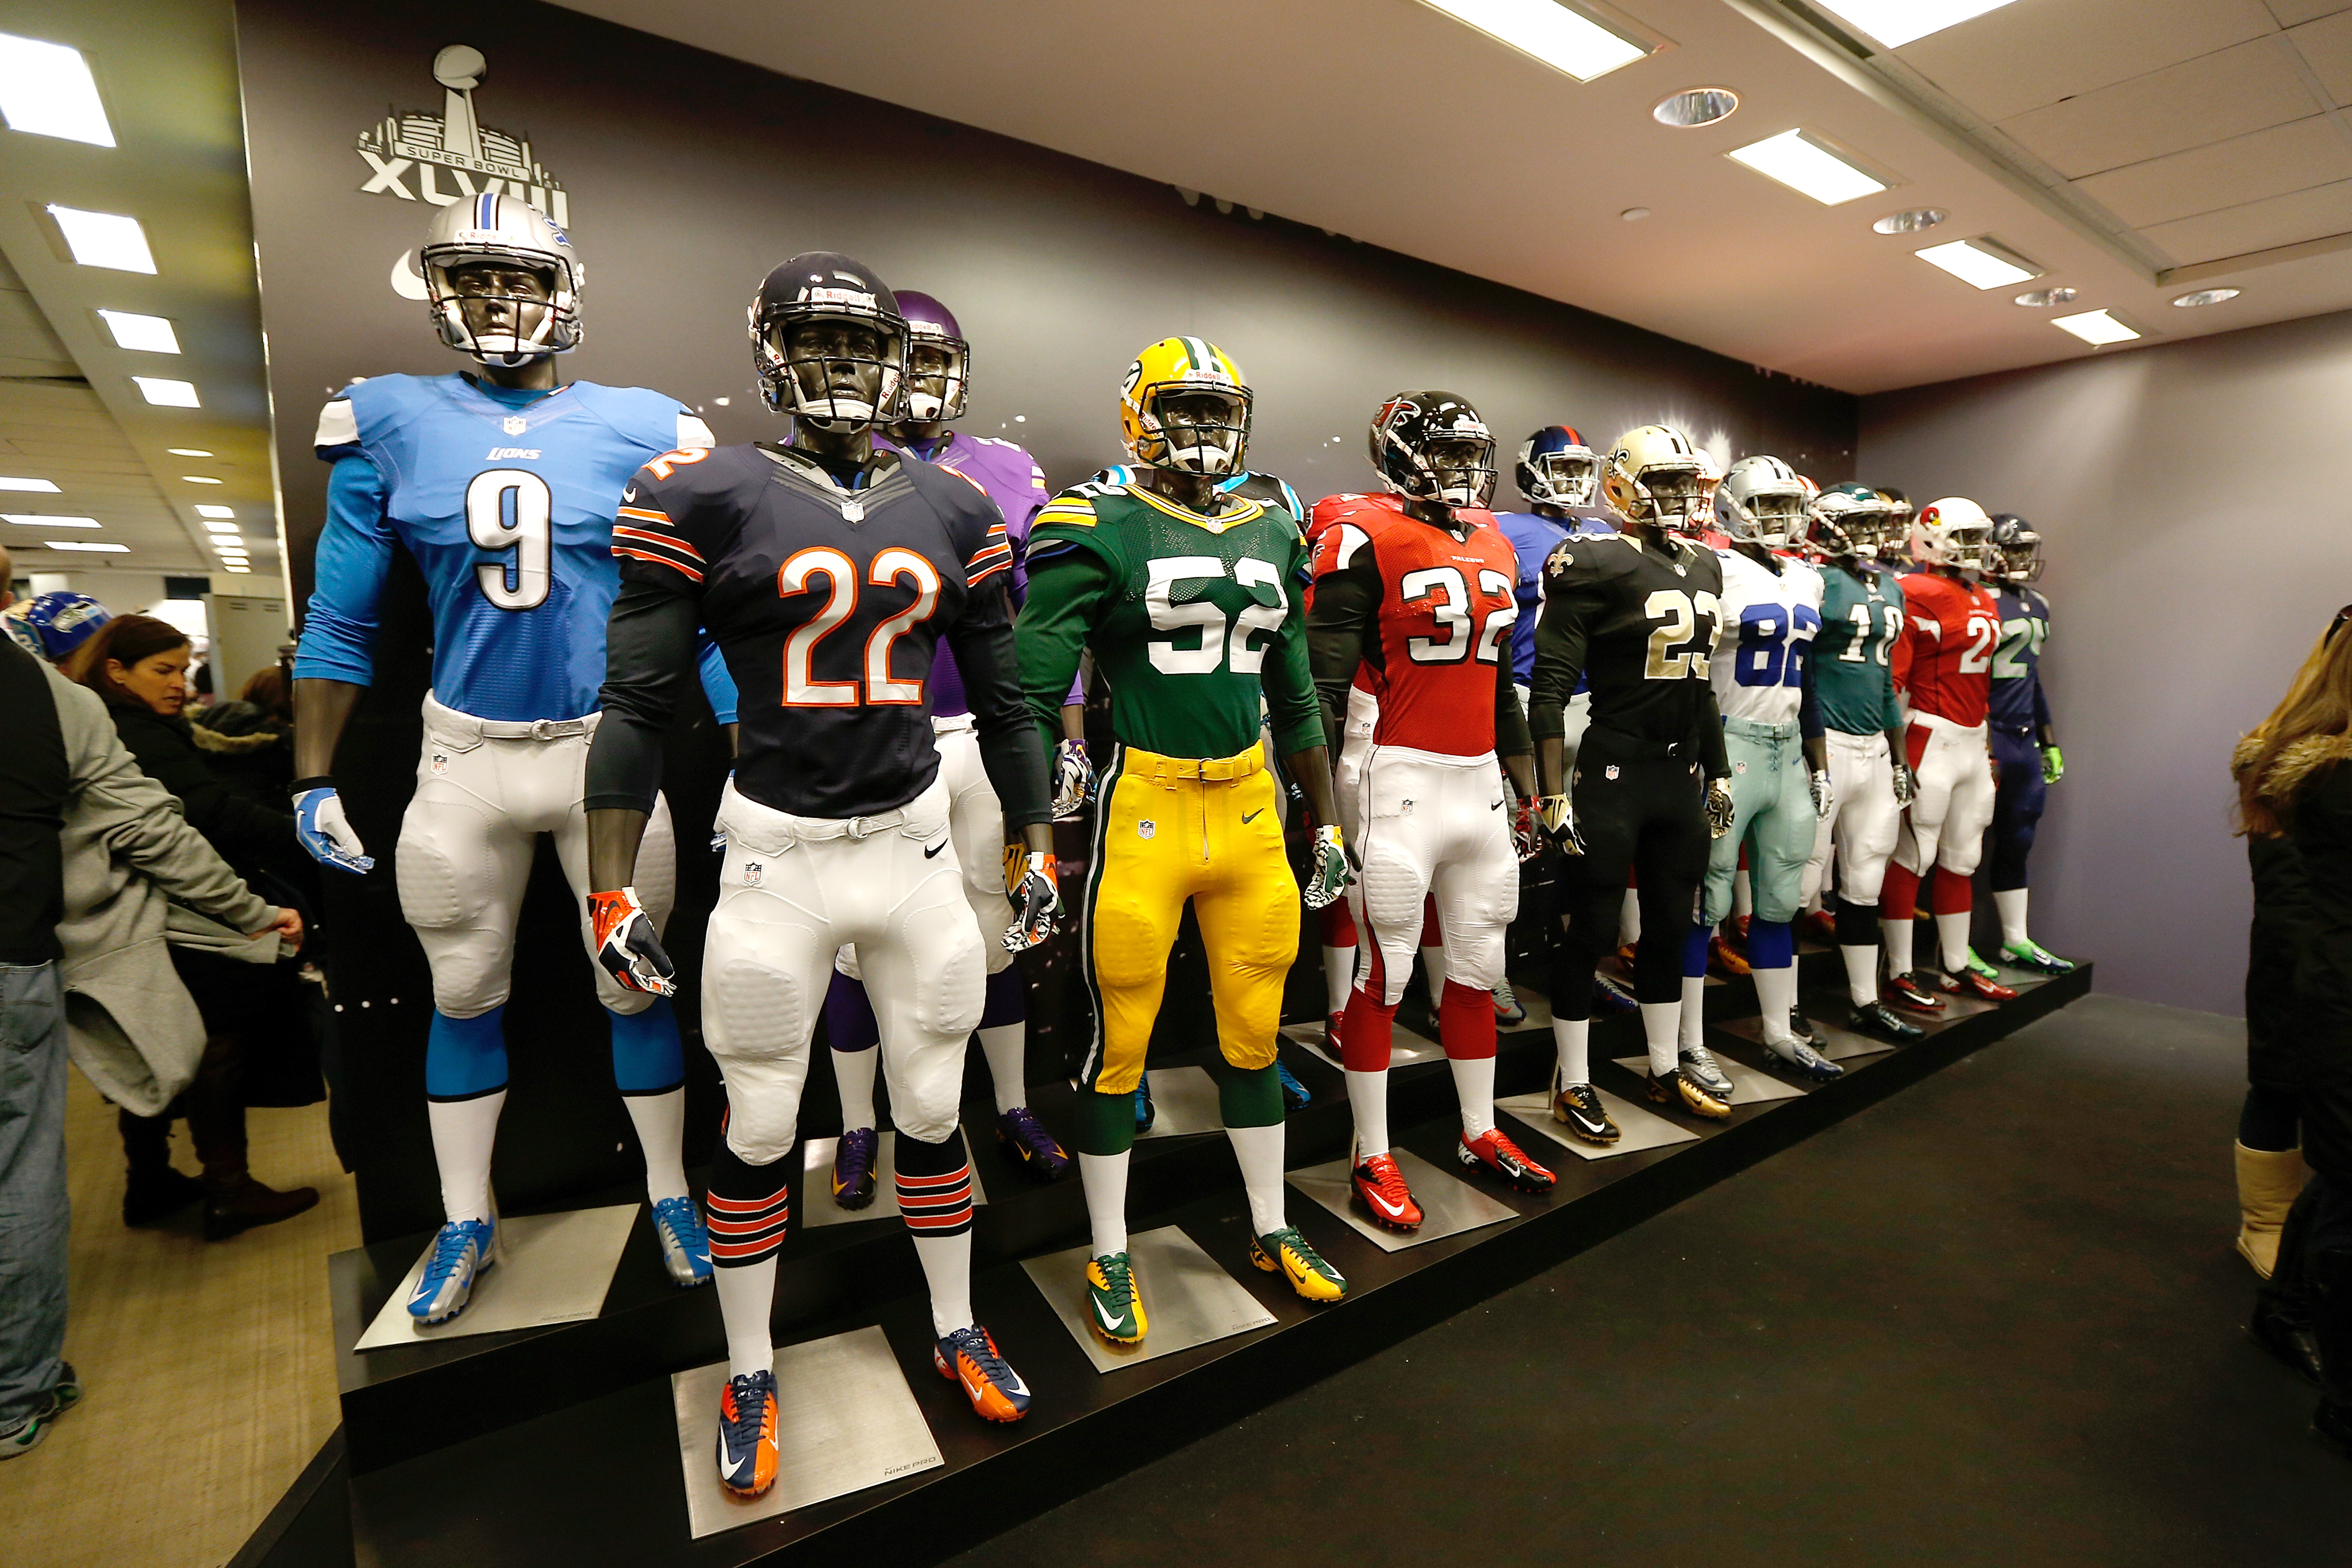 NFL Jerseys Cost $295, Thanks to Price Increase from Nike